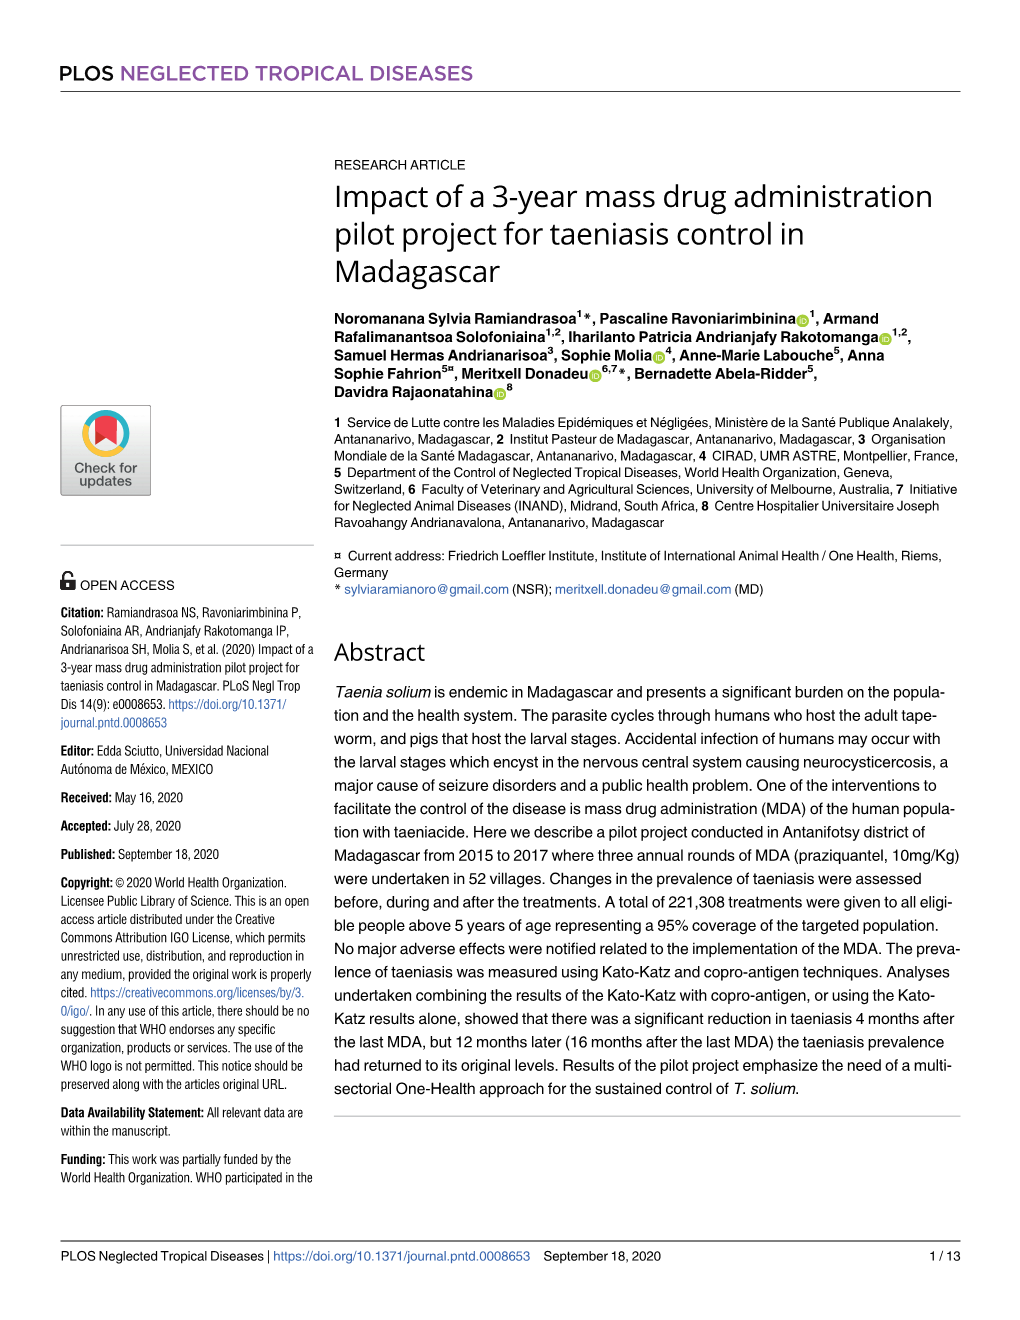 Impact of a 3-Year Mass Drug Administration Pilot Project for Taeniasis Control in Madagascar